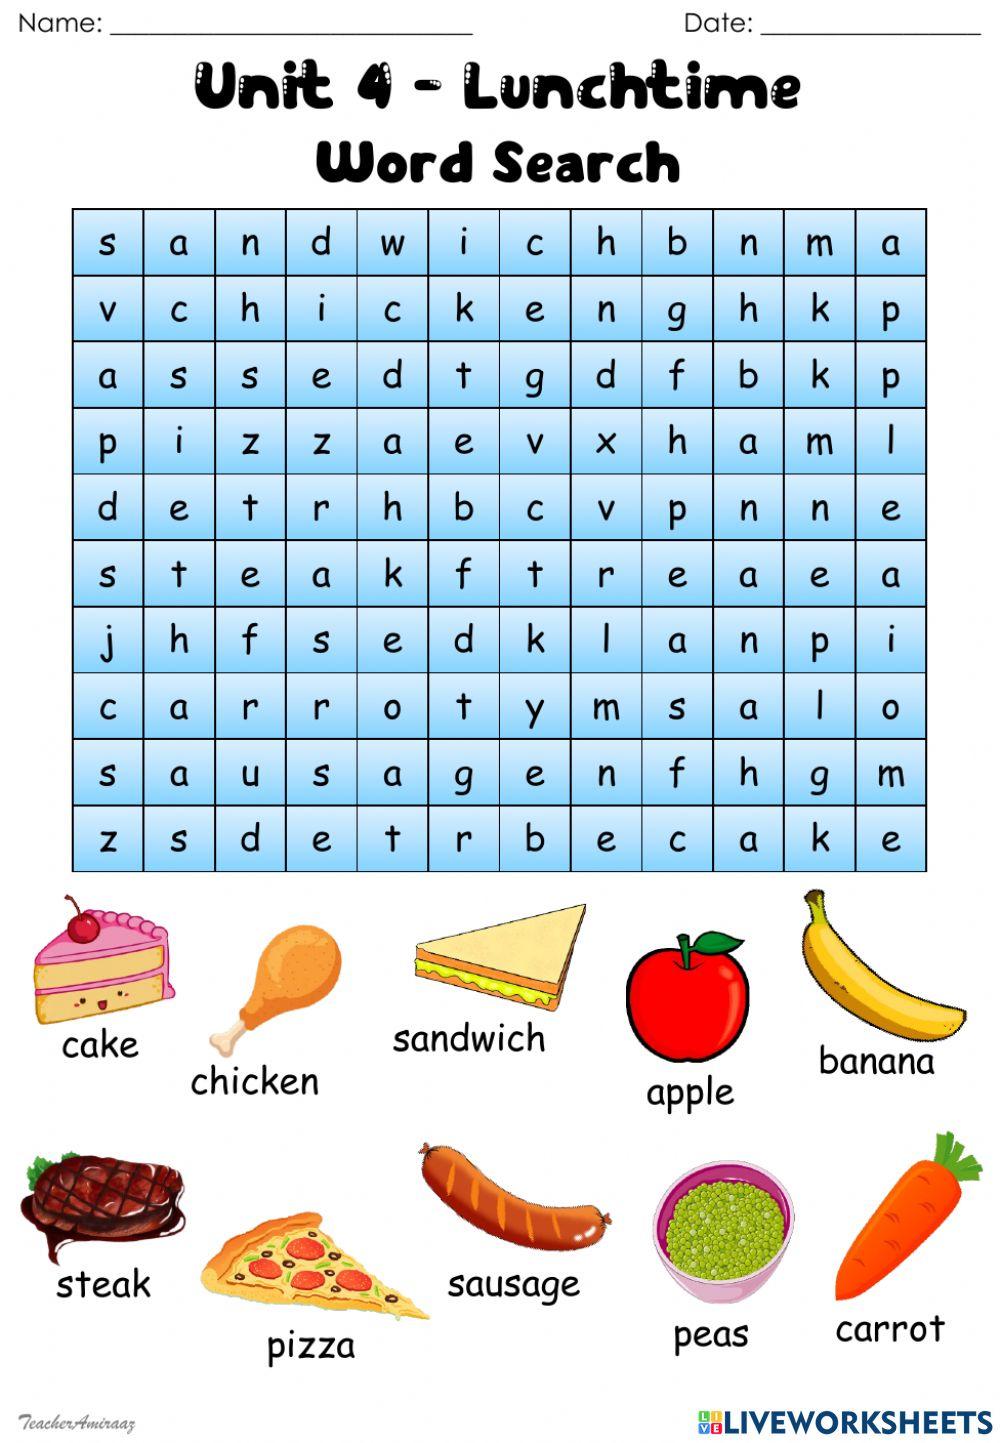 Word Search Lunchtime